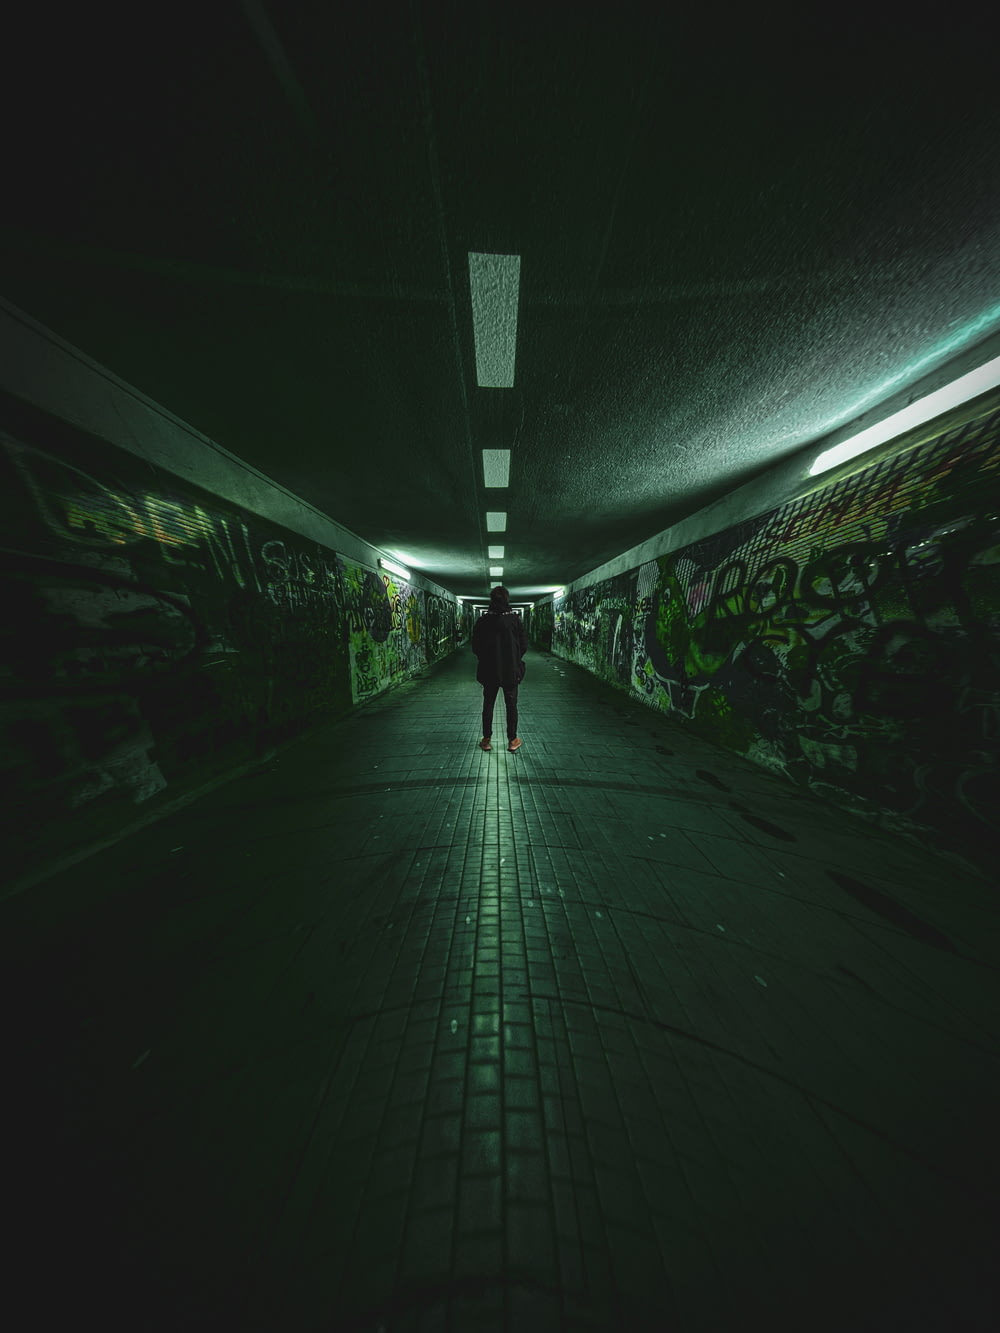 a person walking down a dark tunnel with graffiti on the walls